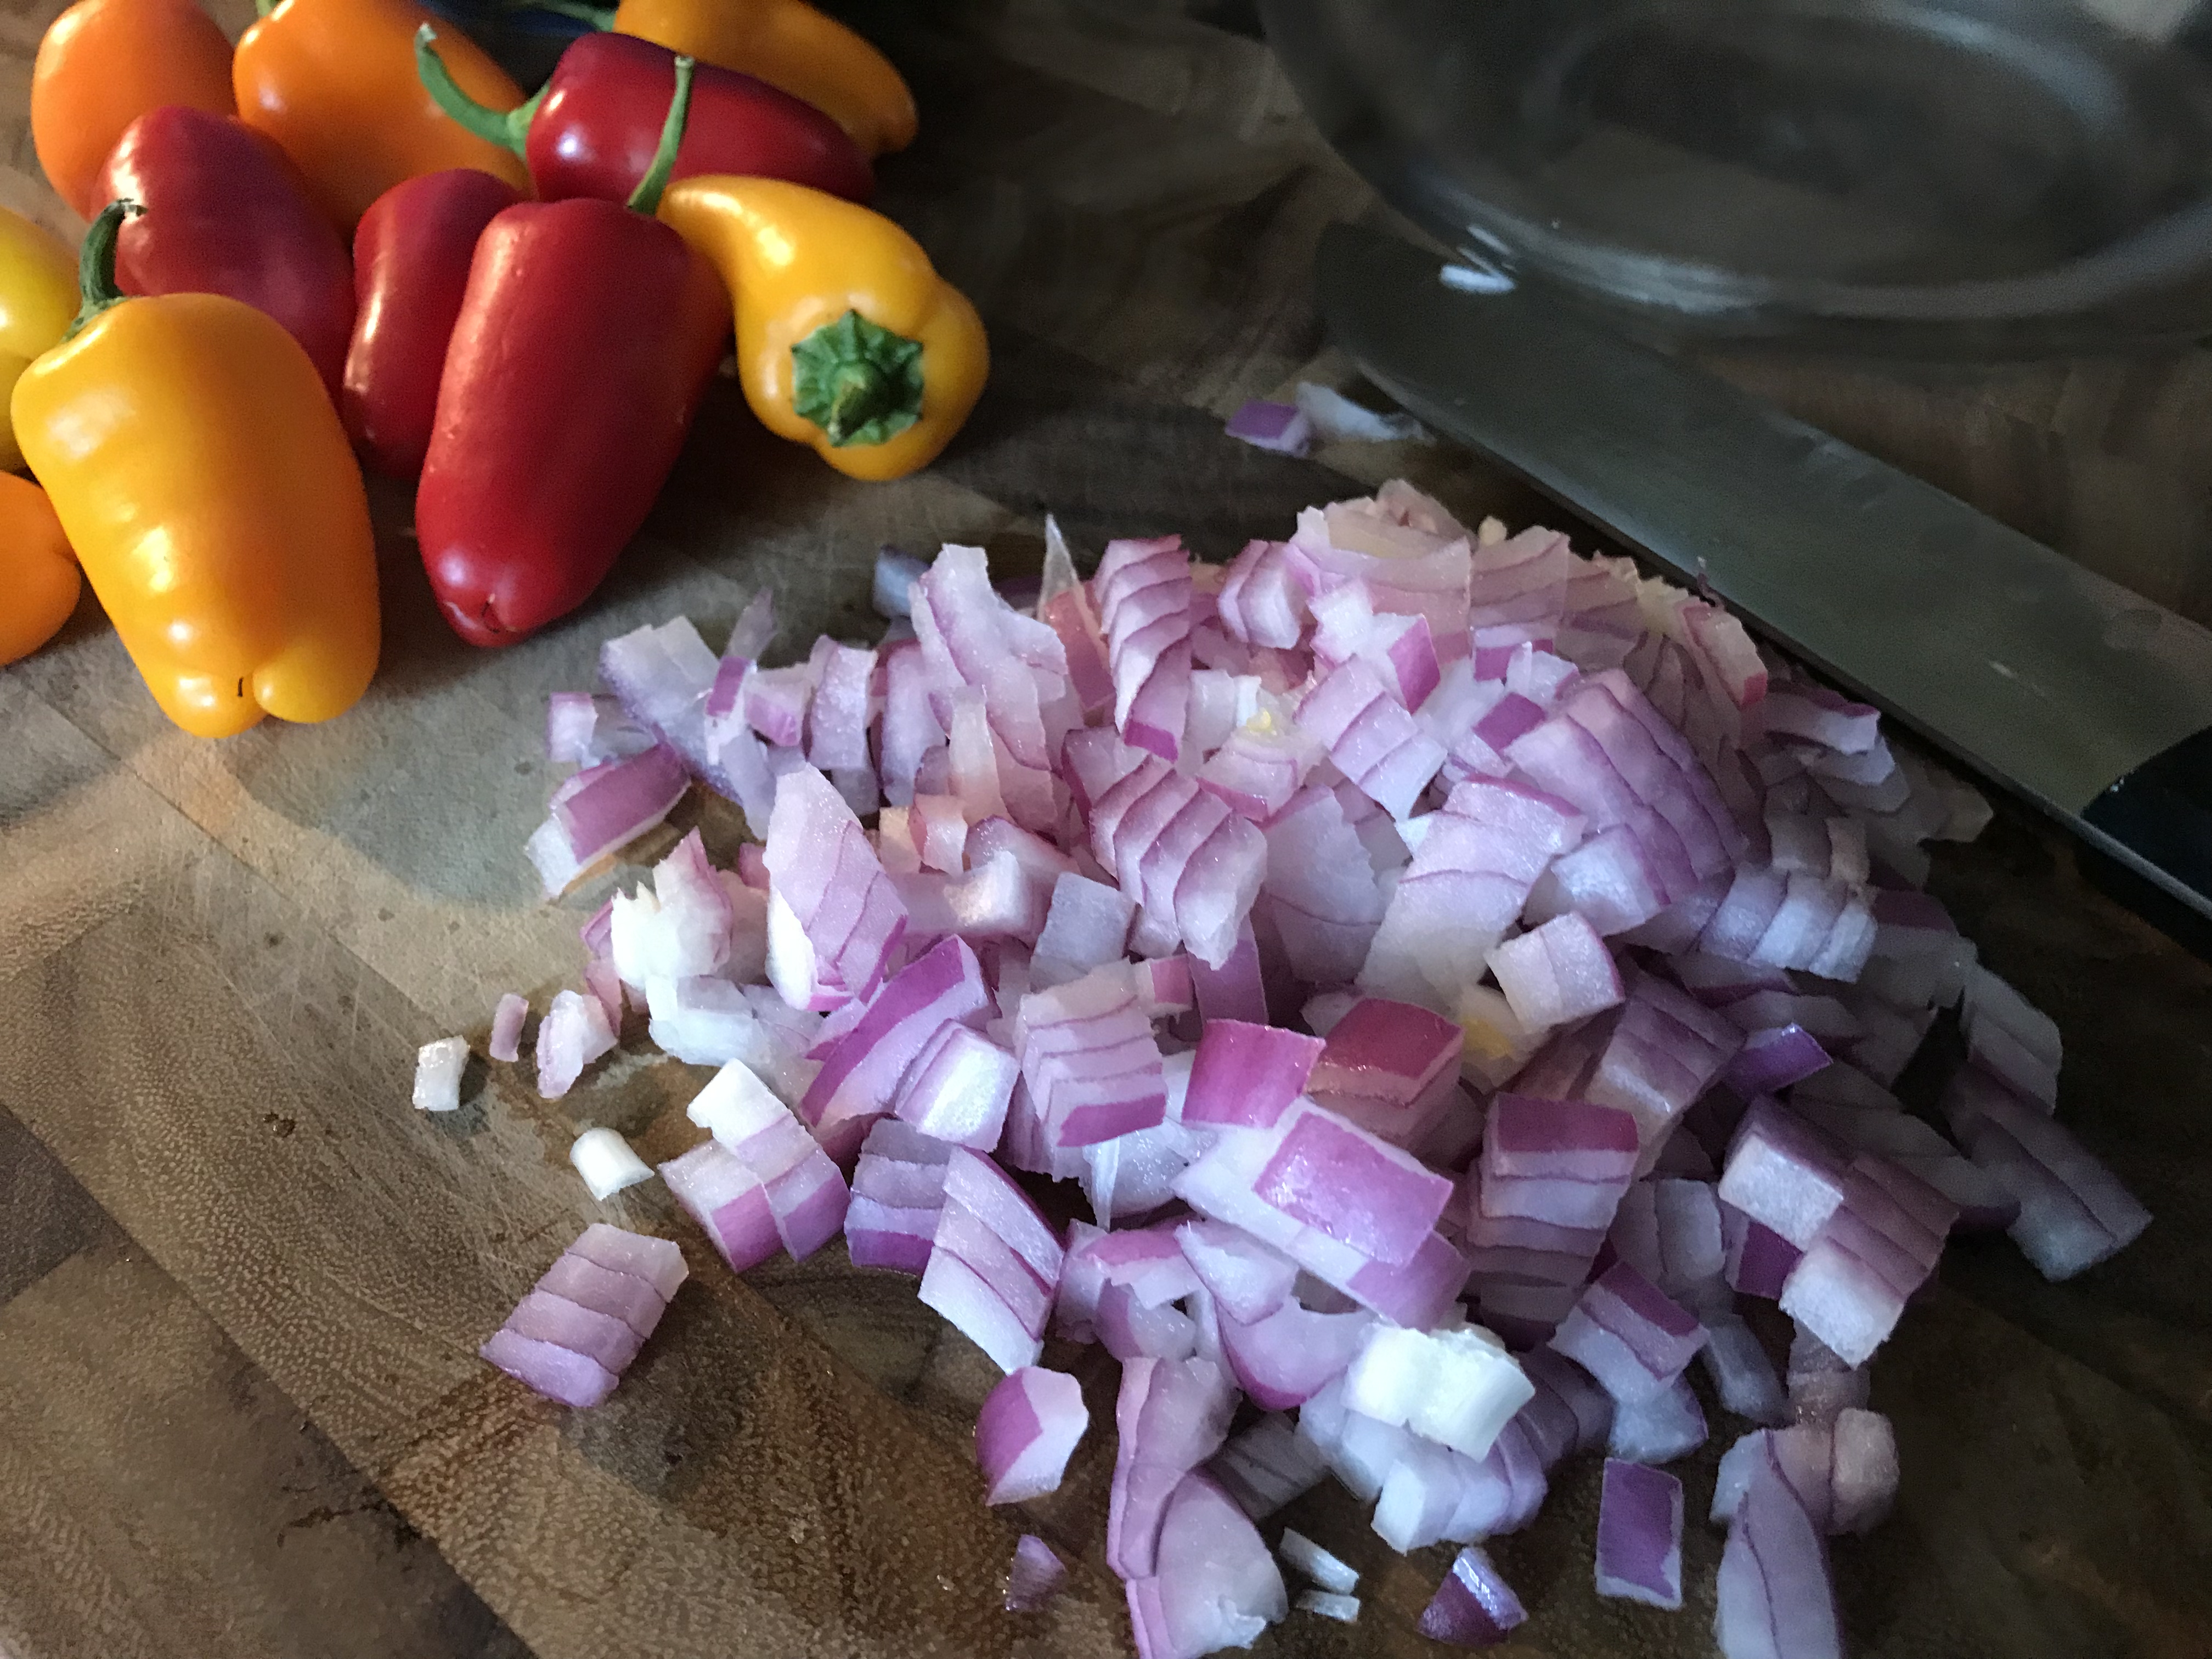 Diced Red Onion (2)